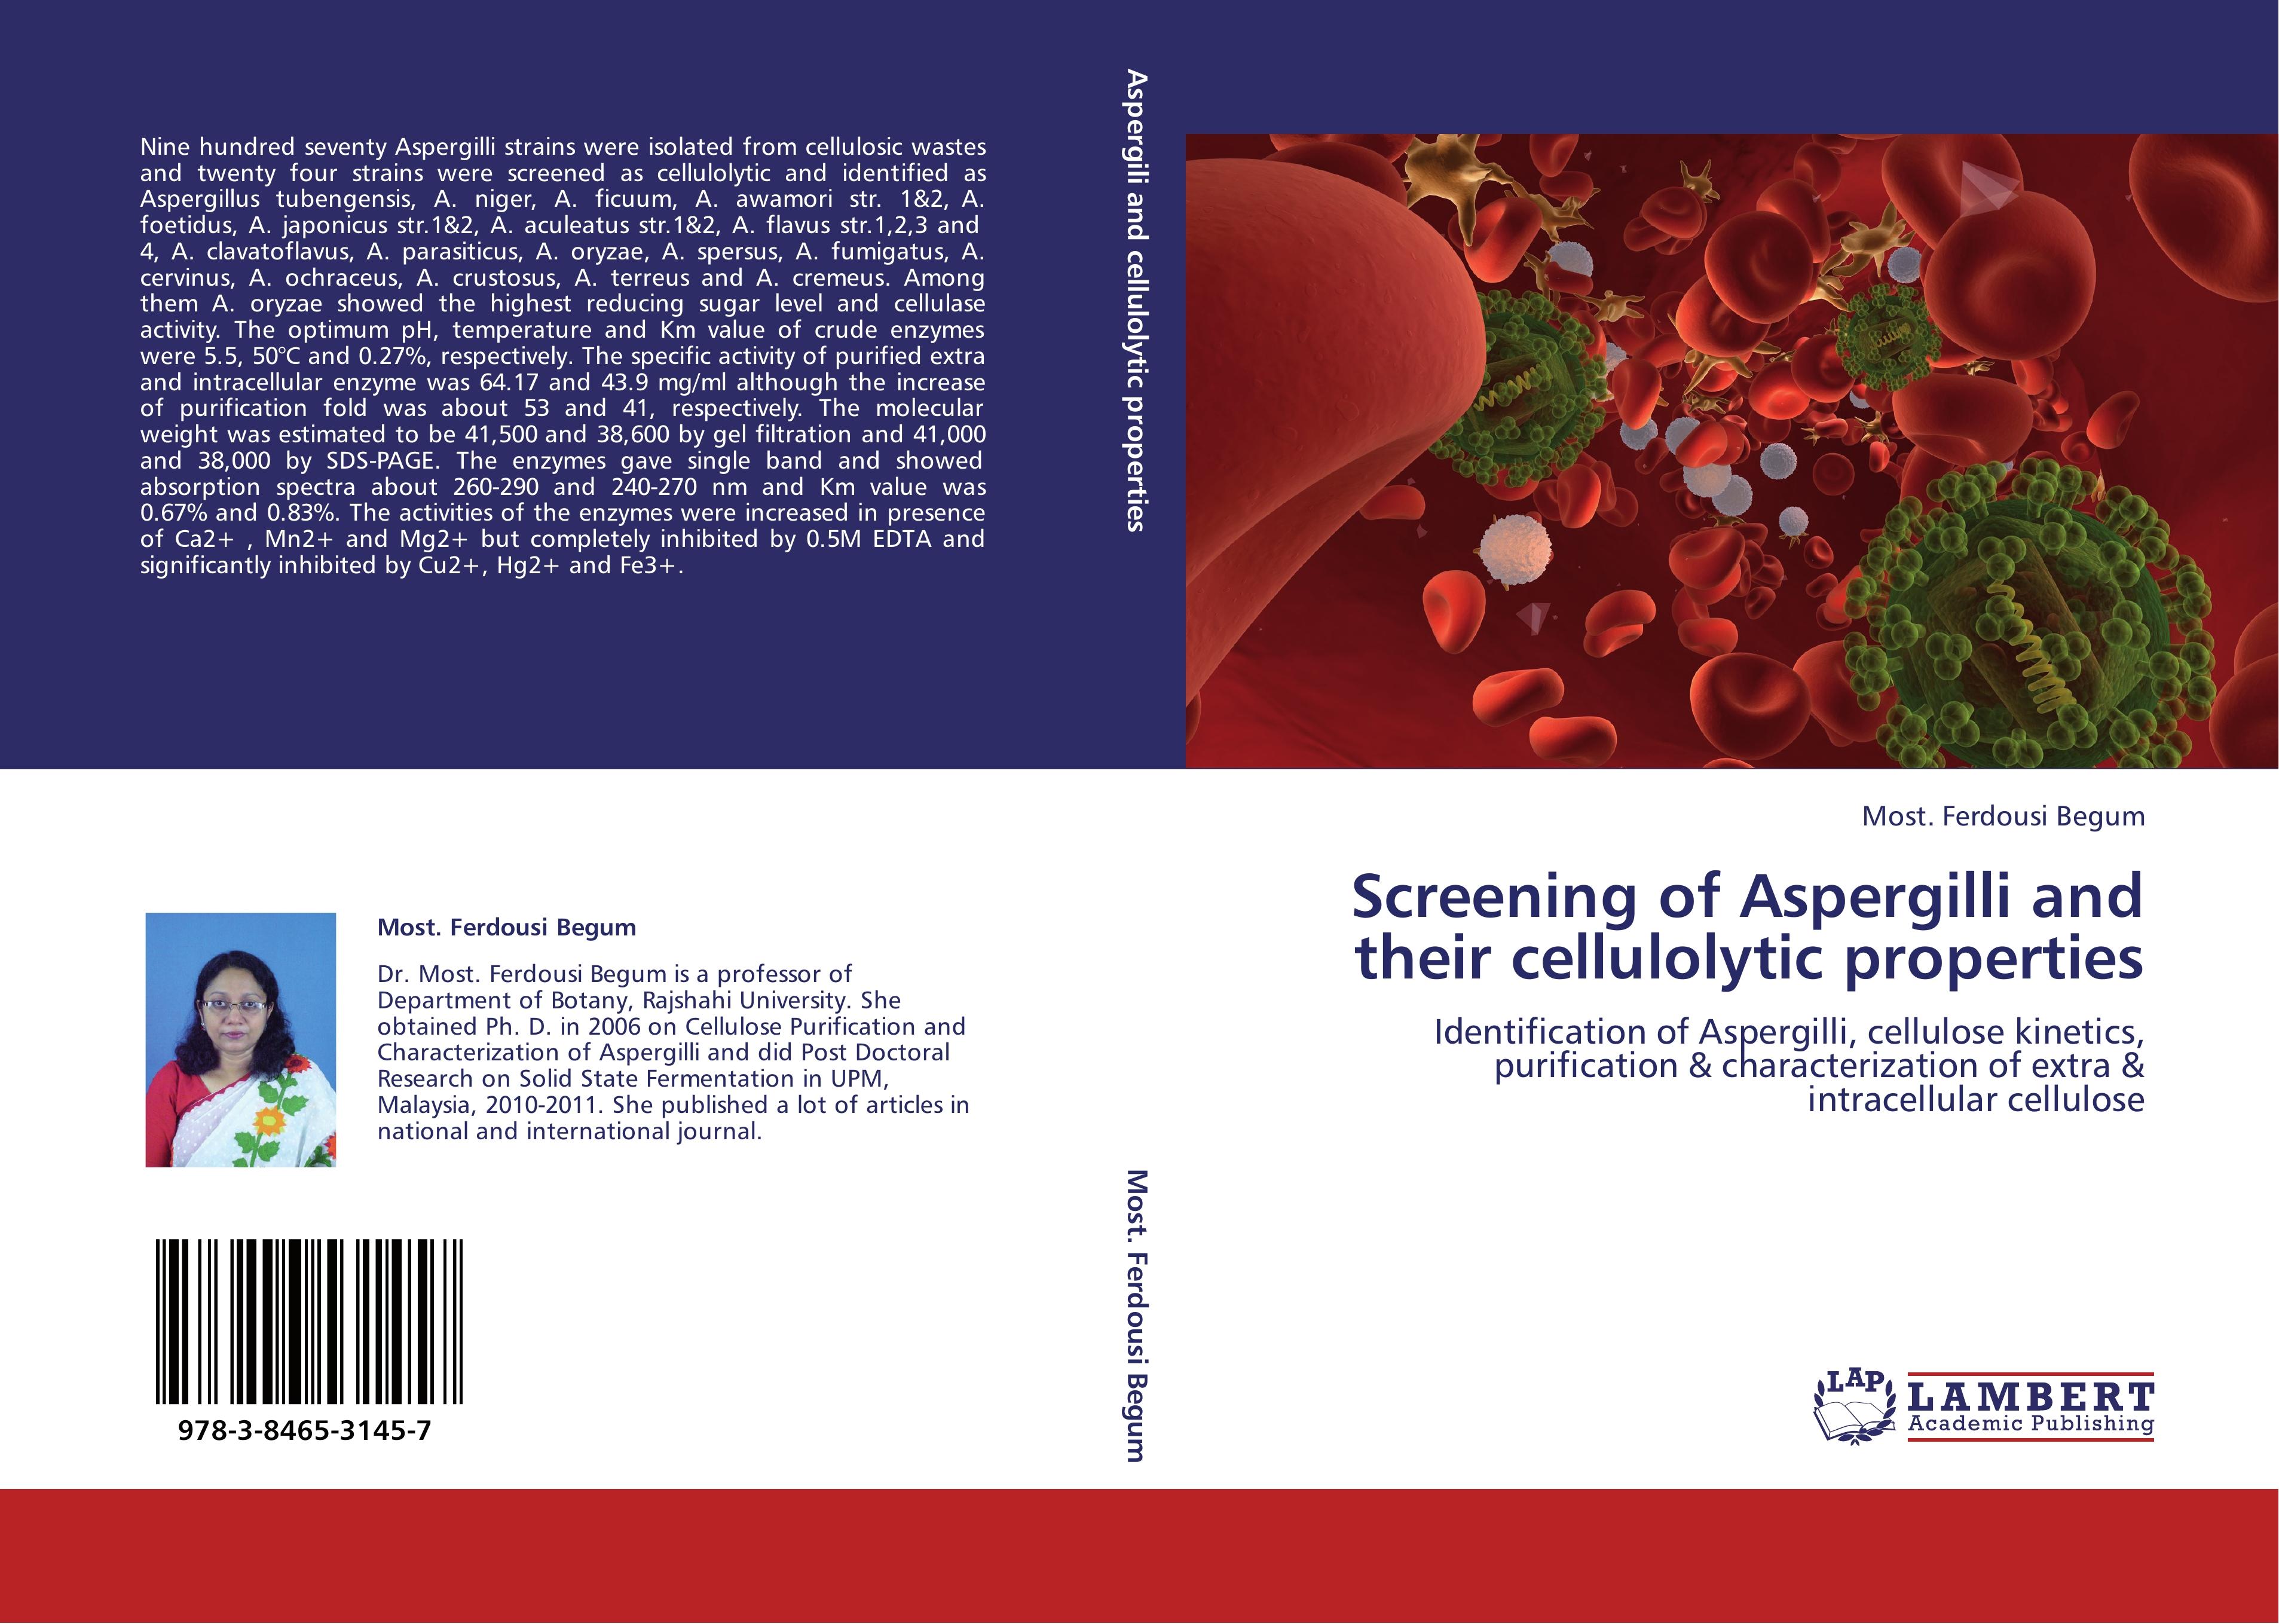 Screening of Aspergilli and their cellulolytic properties - Most. Ferdousi Begum